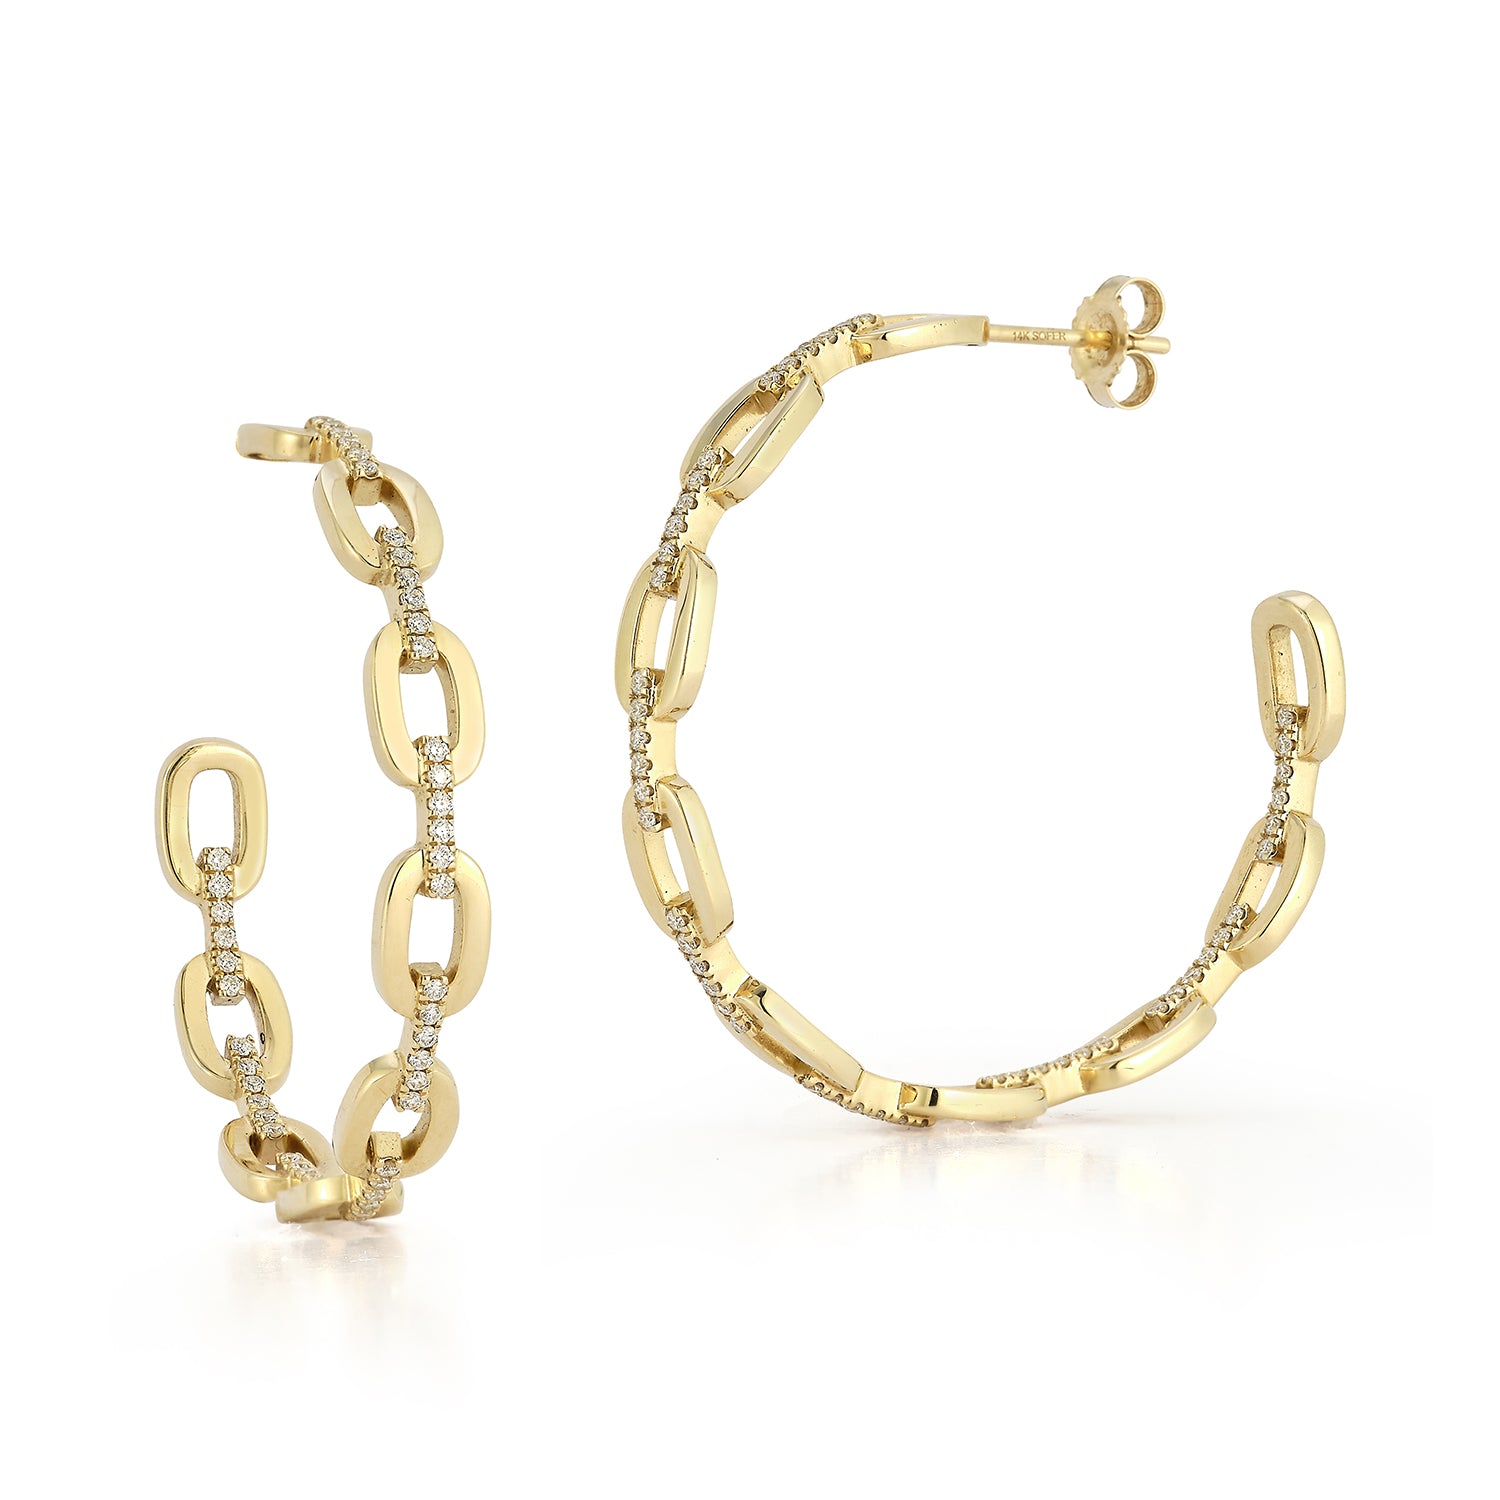 Gold Link Stud Hoop Earrings with Pave Diamond Bar Connection